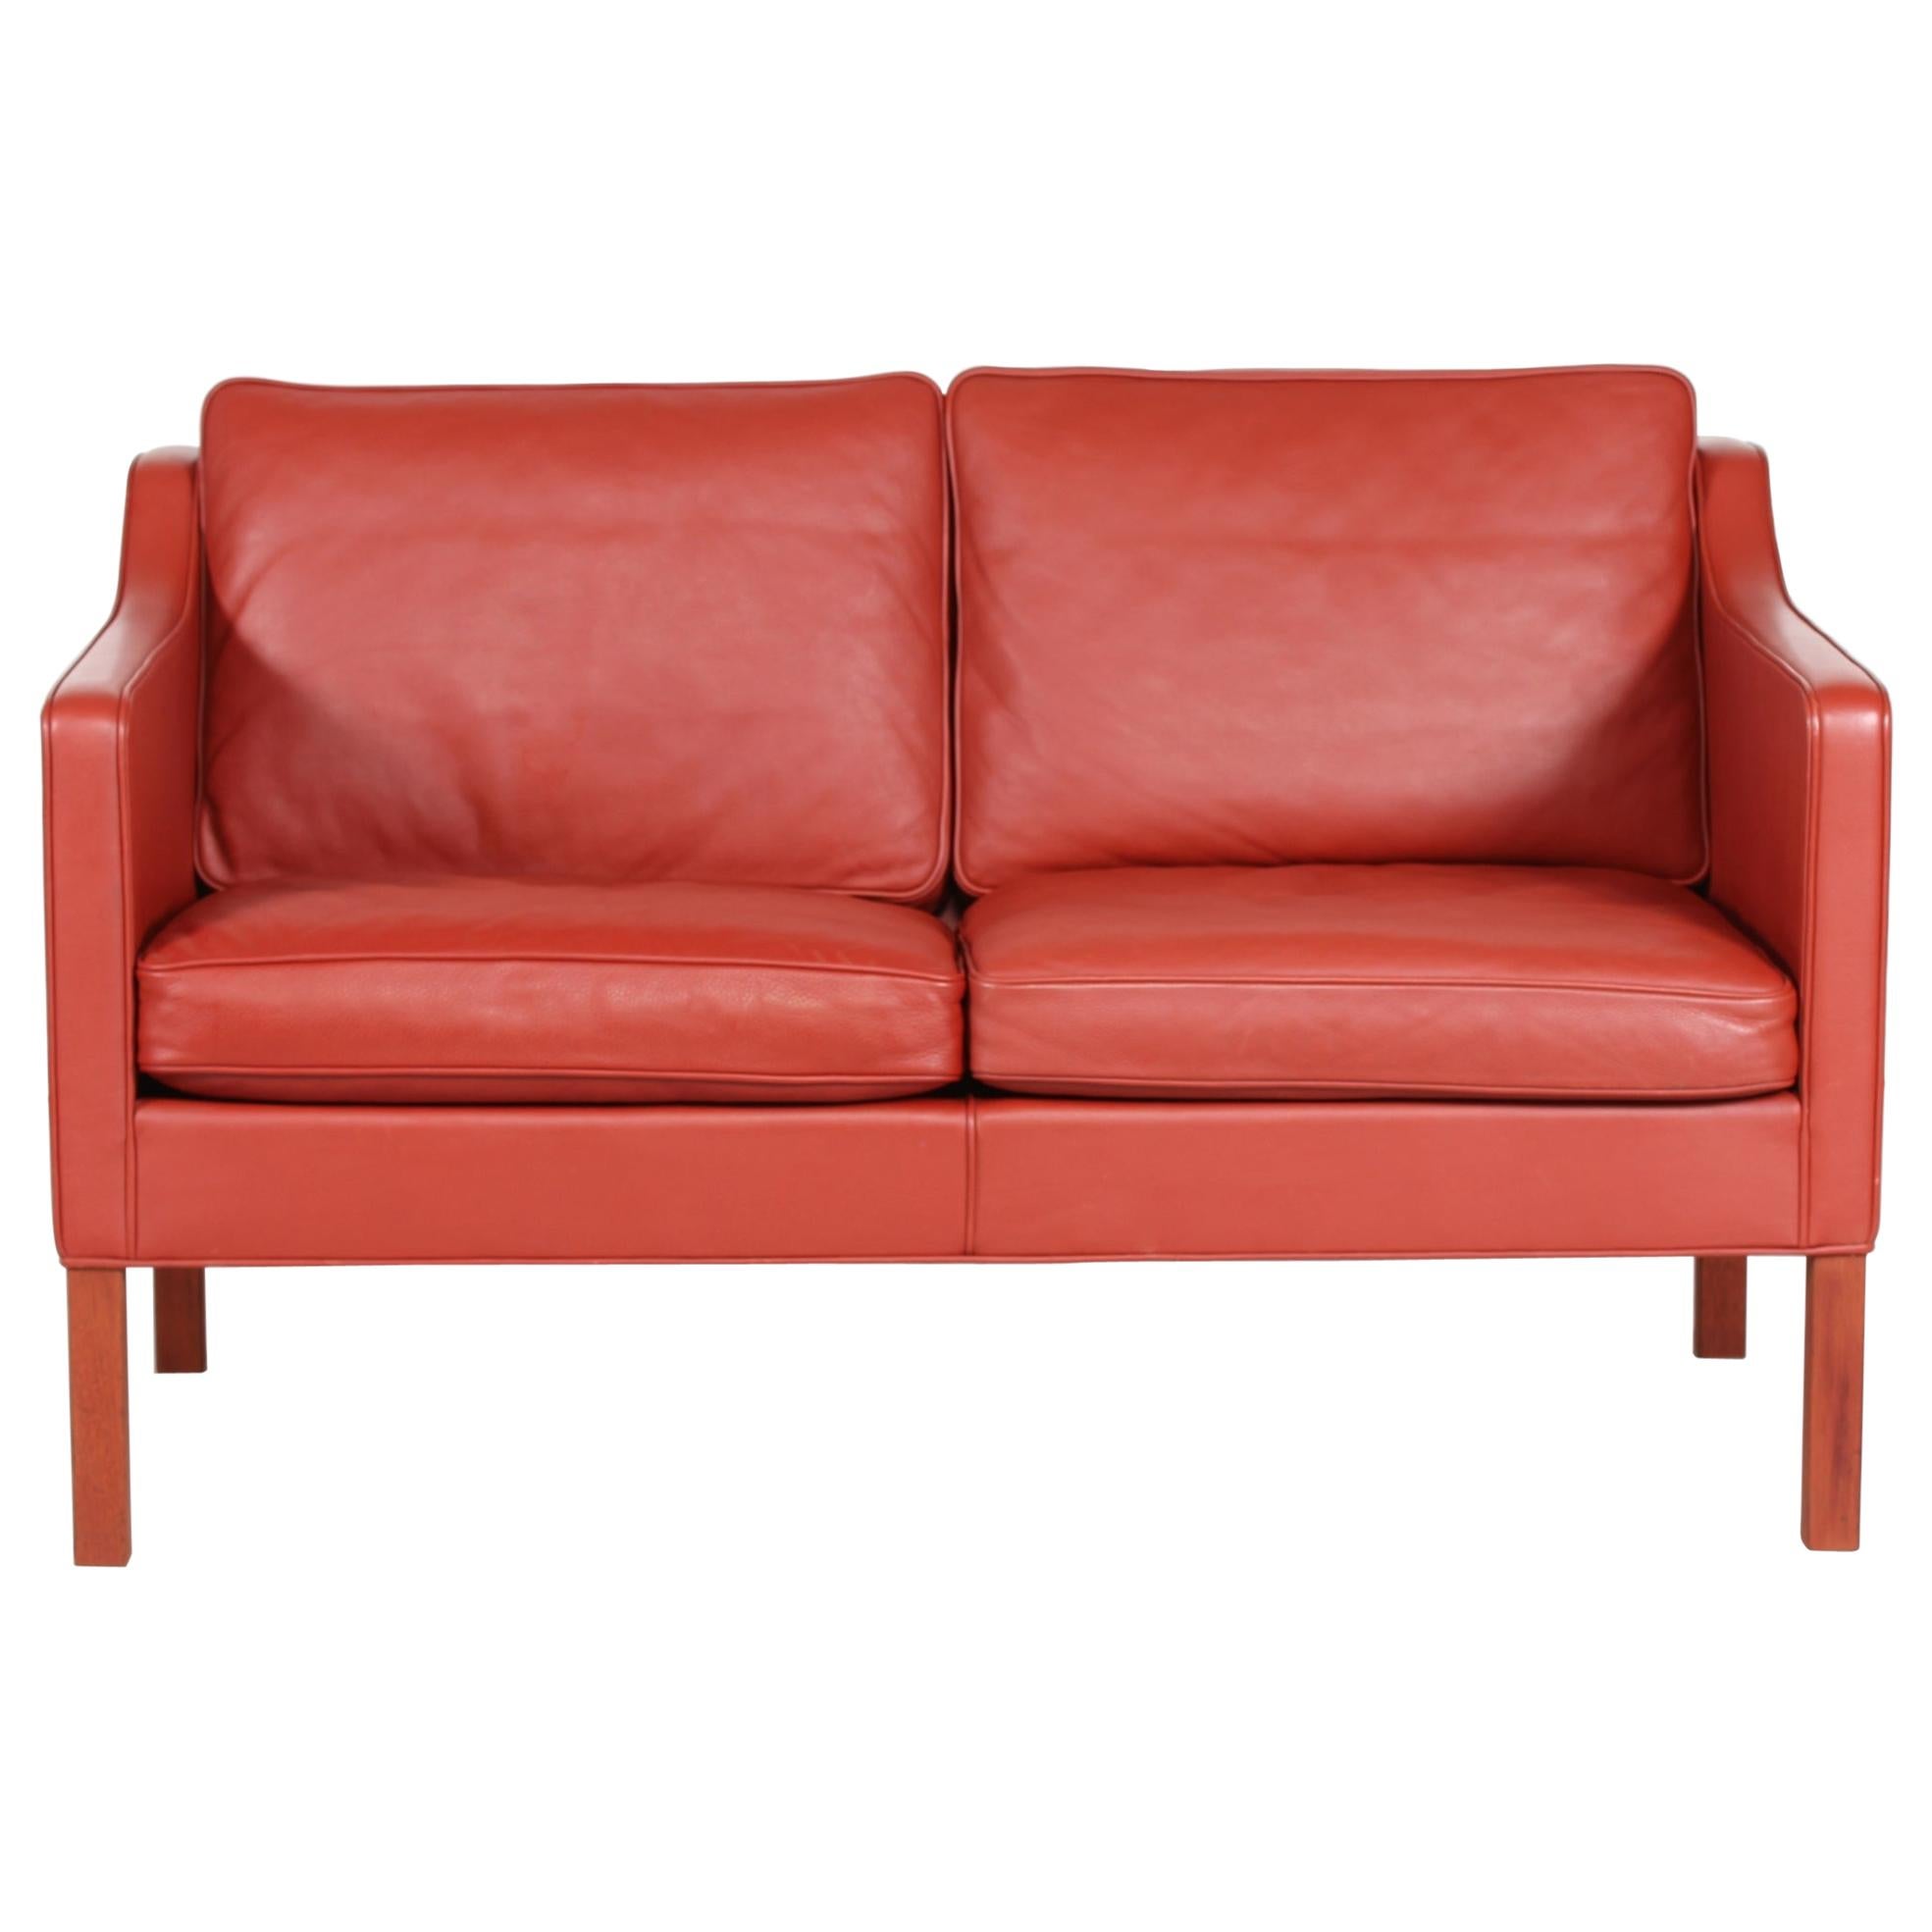 Børge Mogensen Sofa 2322 with Red Brown Leather by Fredericia Furniture, 1995